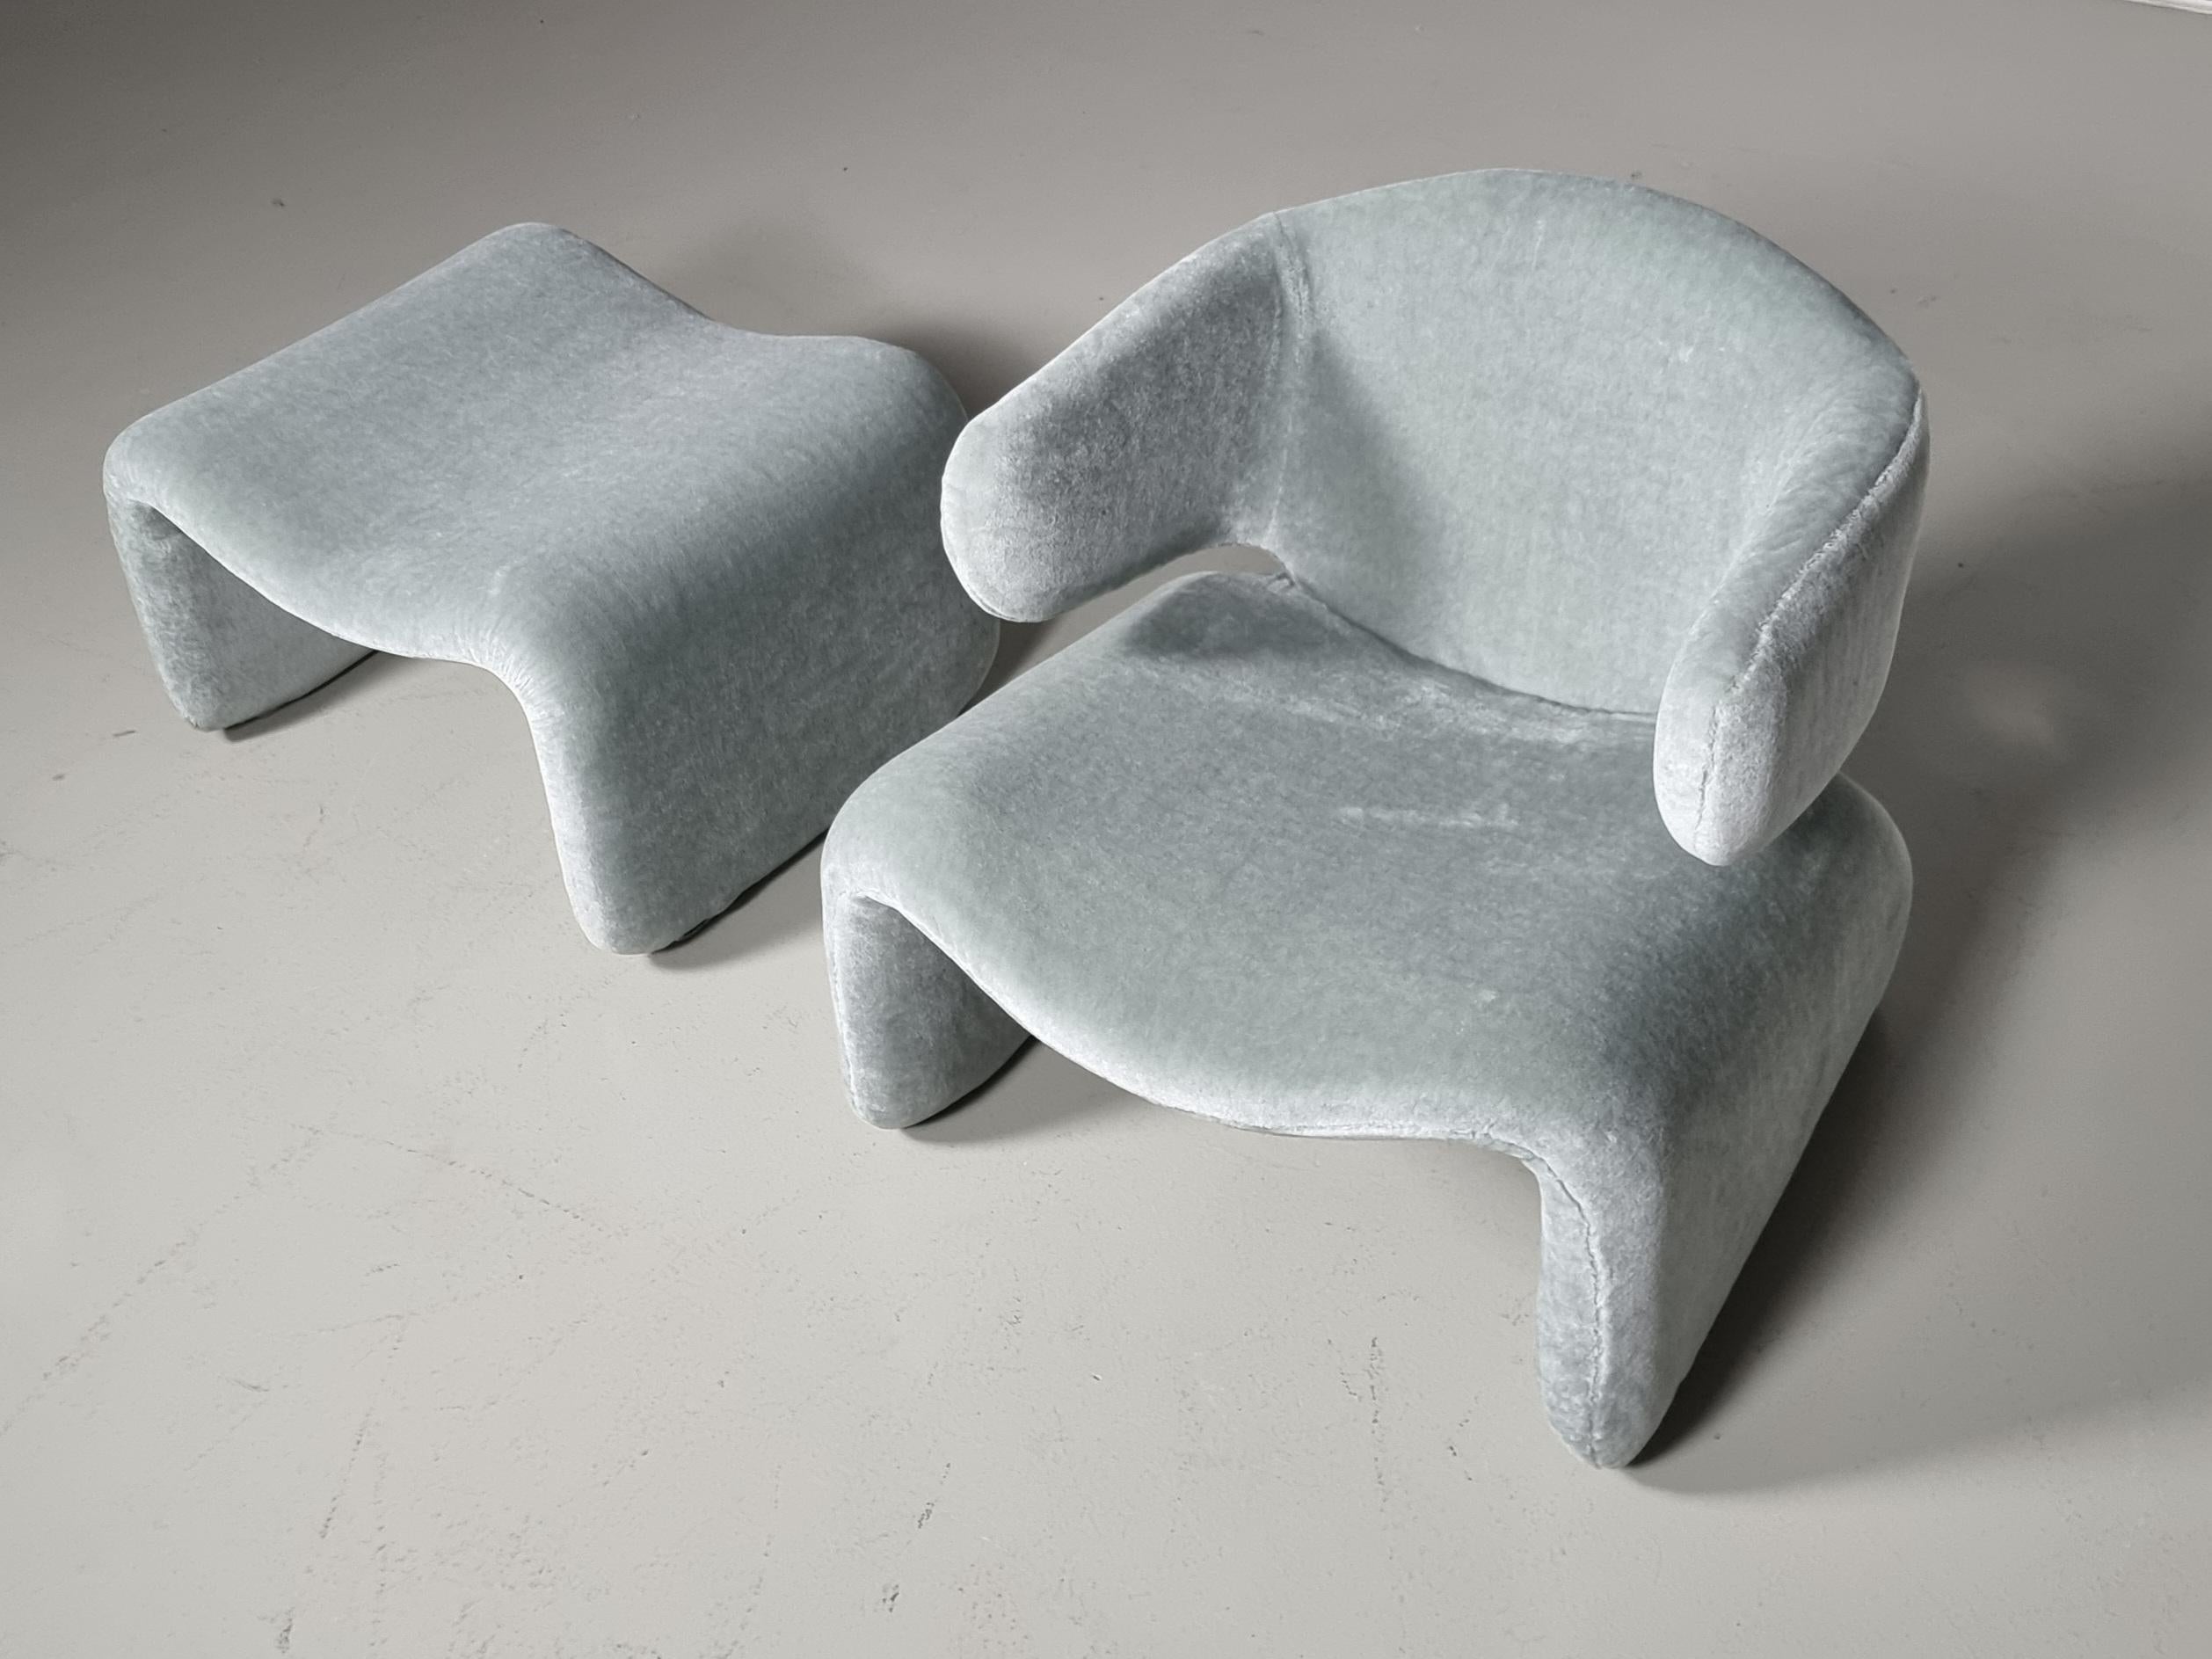 Rare Djinn chair with ottoman by Olivier Mourgue and manufactured by Airborne International, circa 1965. Early edition newly upholstered in high-quality mohair wool in a light green. 

This beautiful set is well known for its appearance in “2001: